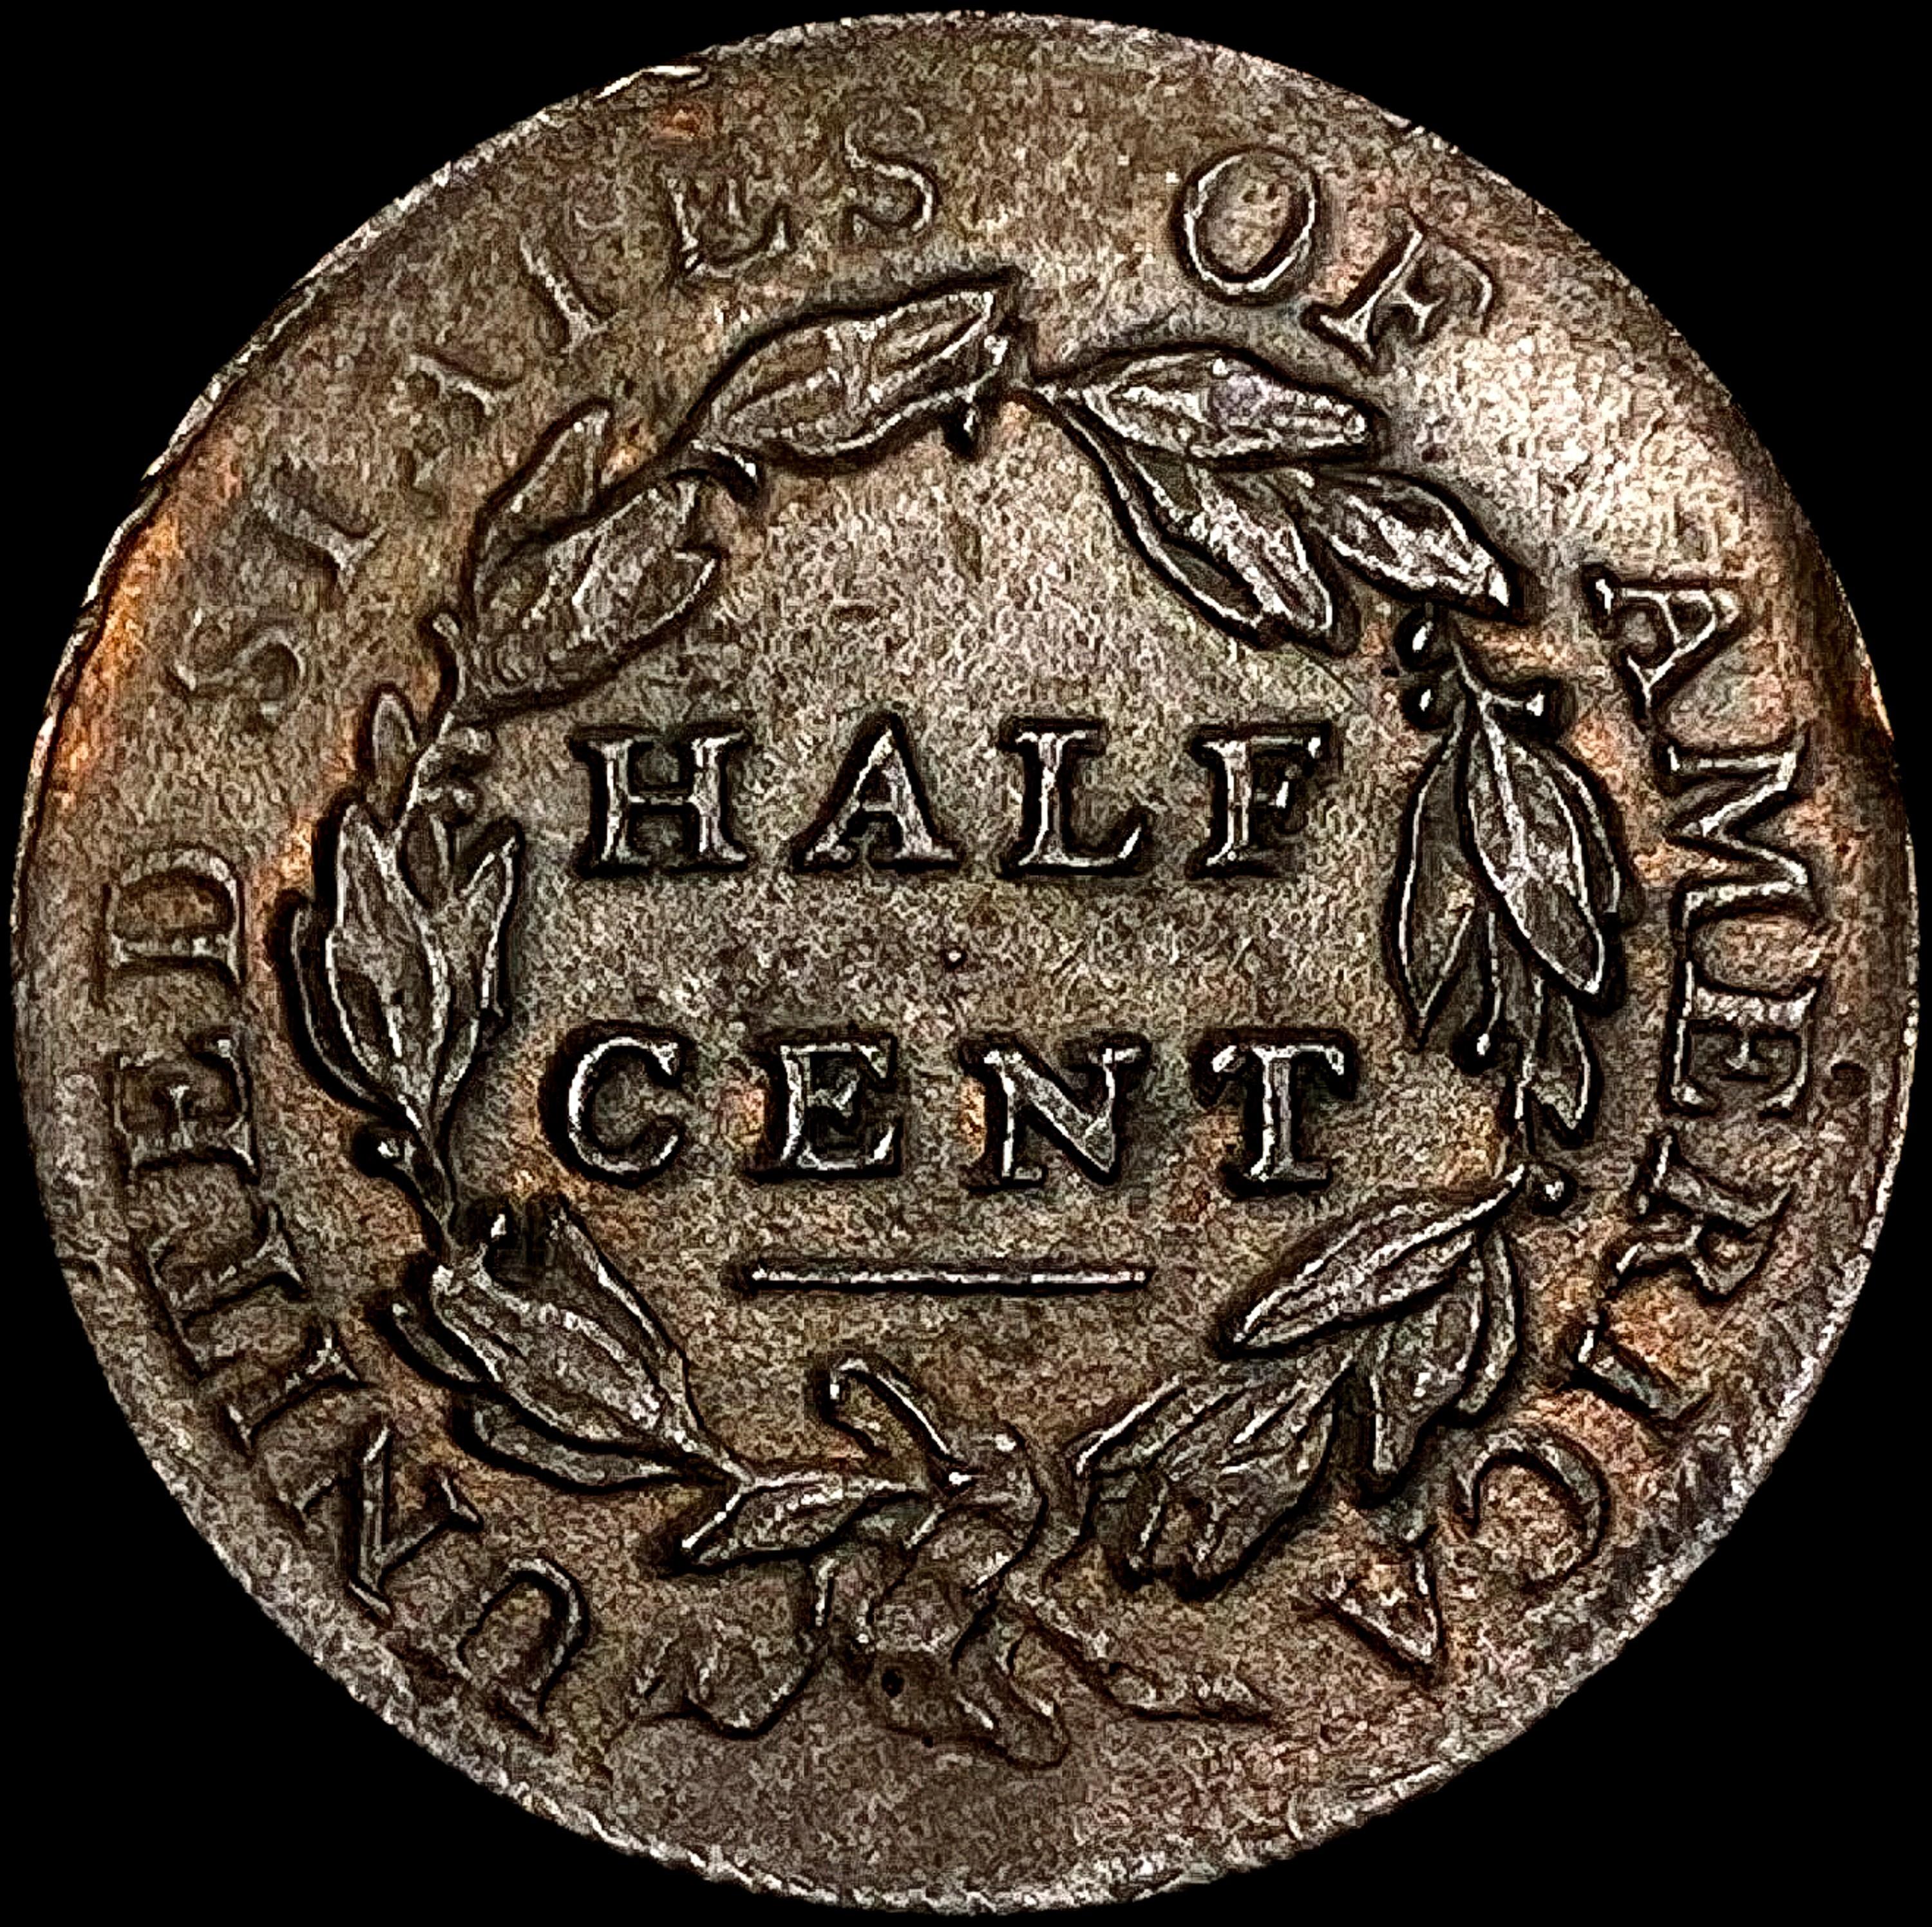 1809 Classic Head Half Cent CLOSELY UNCIRCULATED